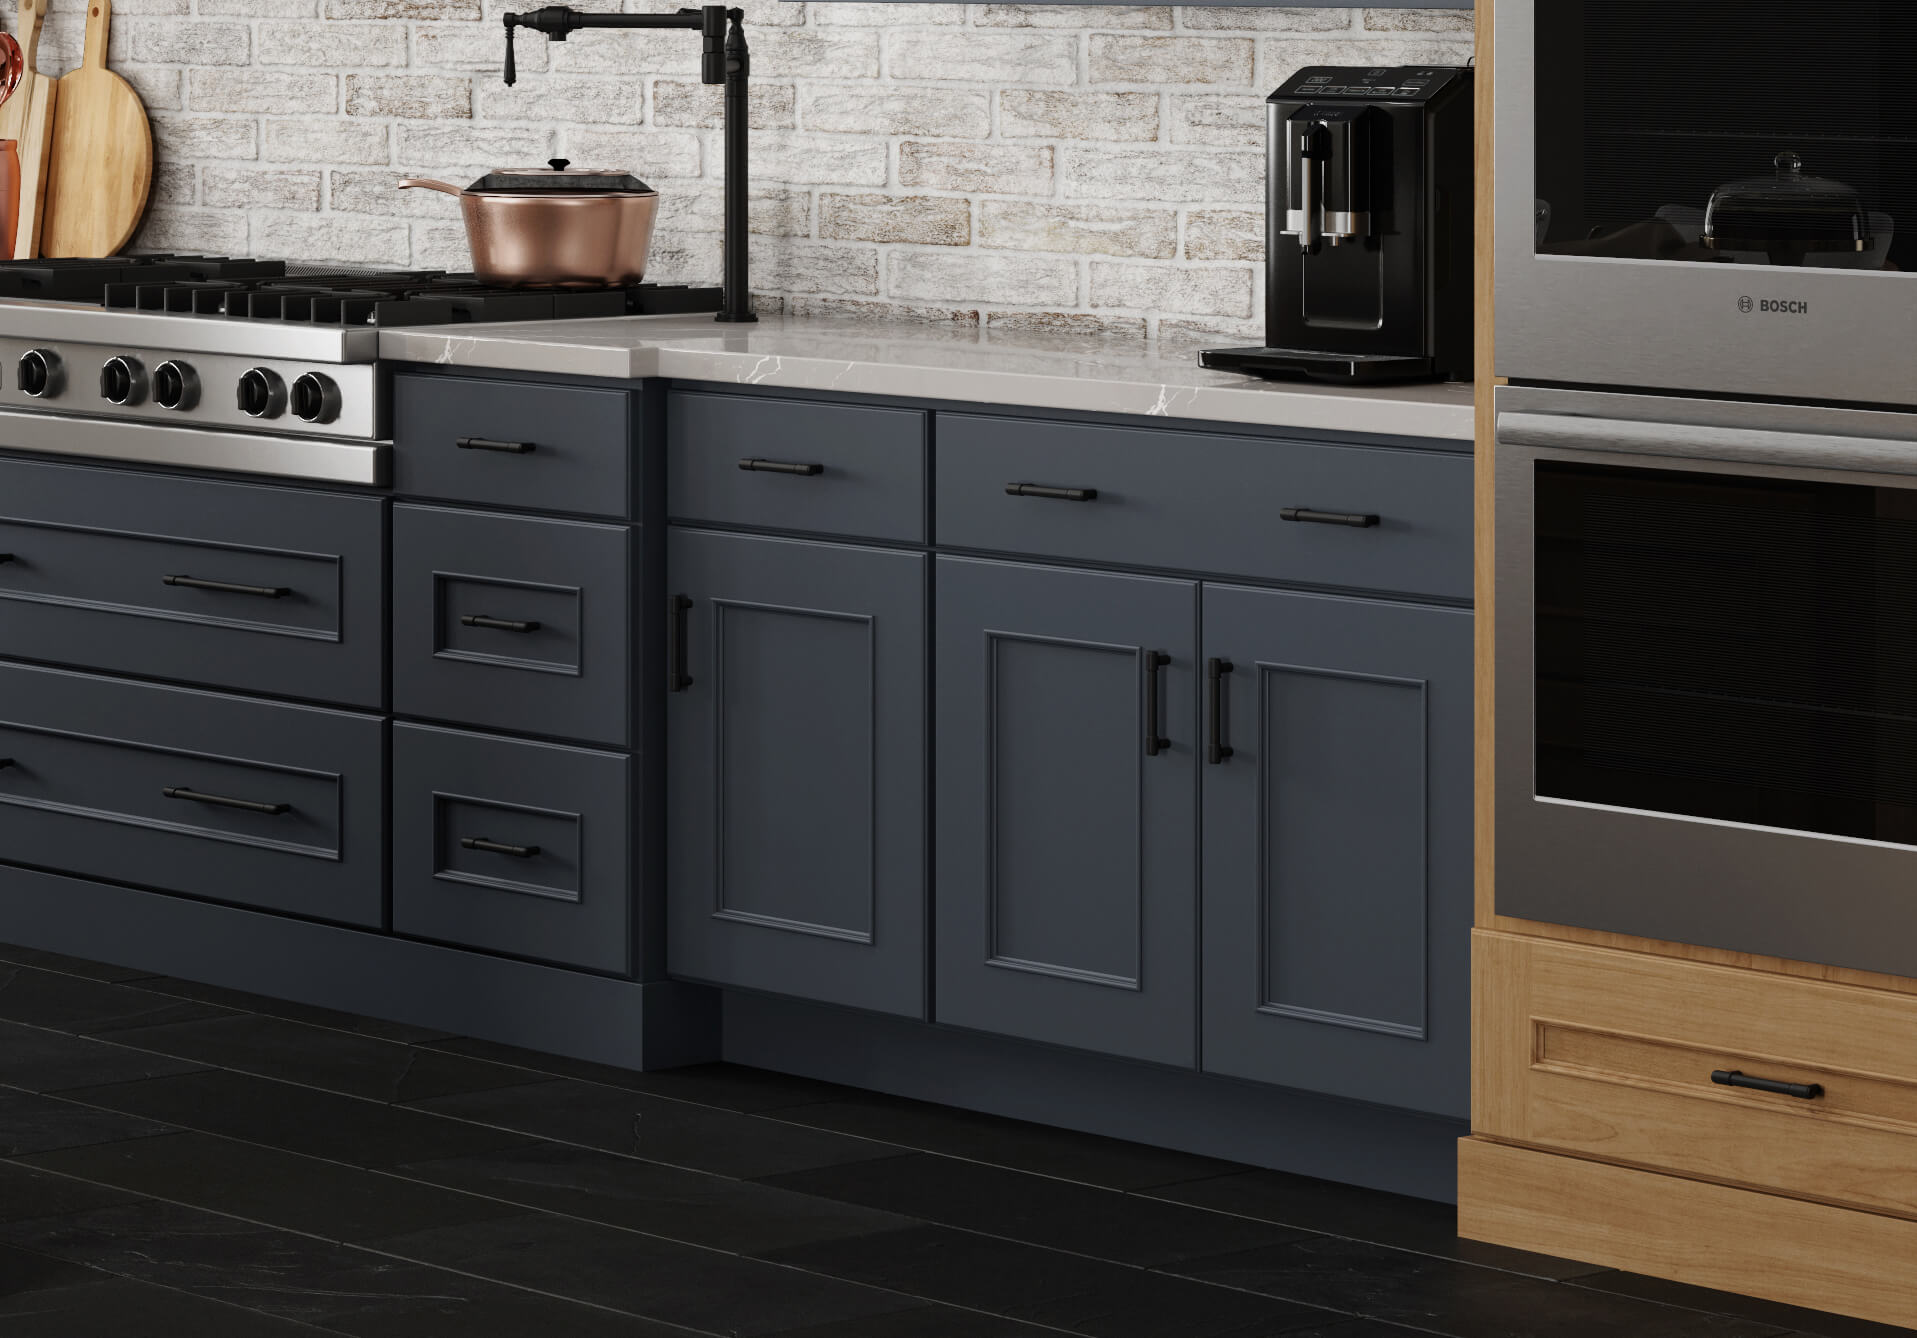 Mixing Slab and 5Piece Drawer Fronts in a Kitchen or Bath Design